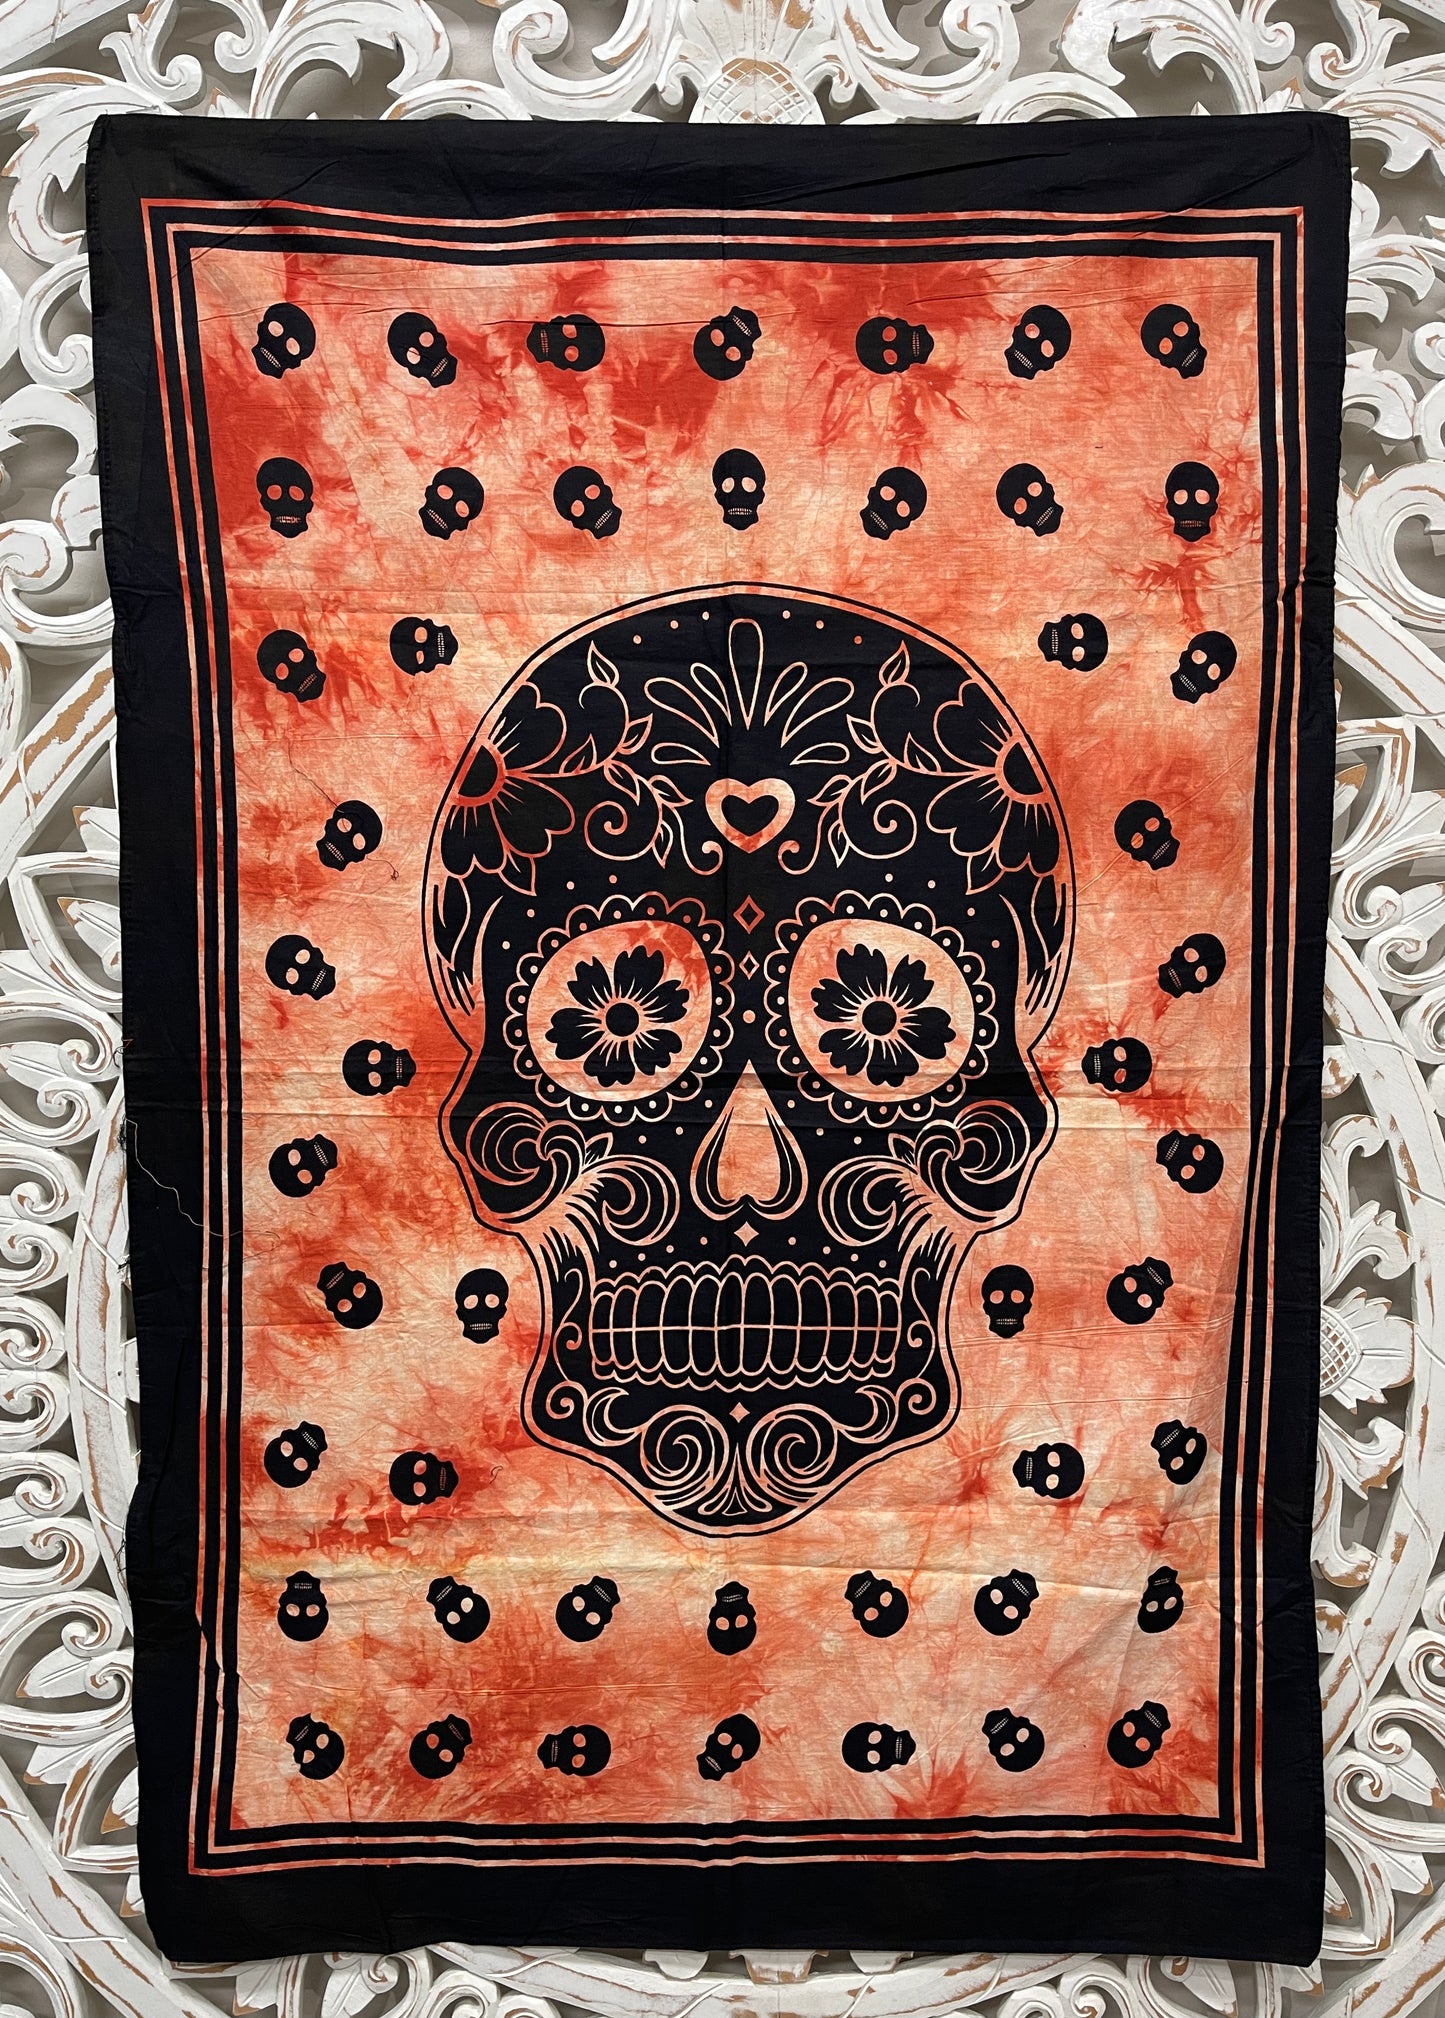 Hand printed Fabric Posters Mini Day of the Dead Skull Tapestries - Available in 3 Colors